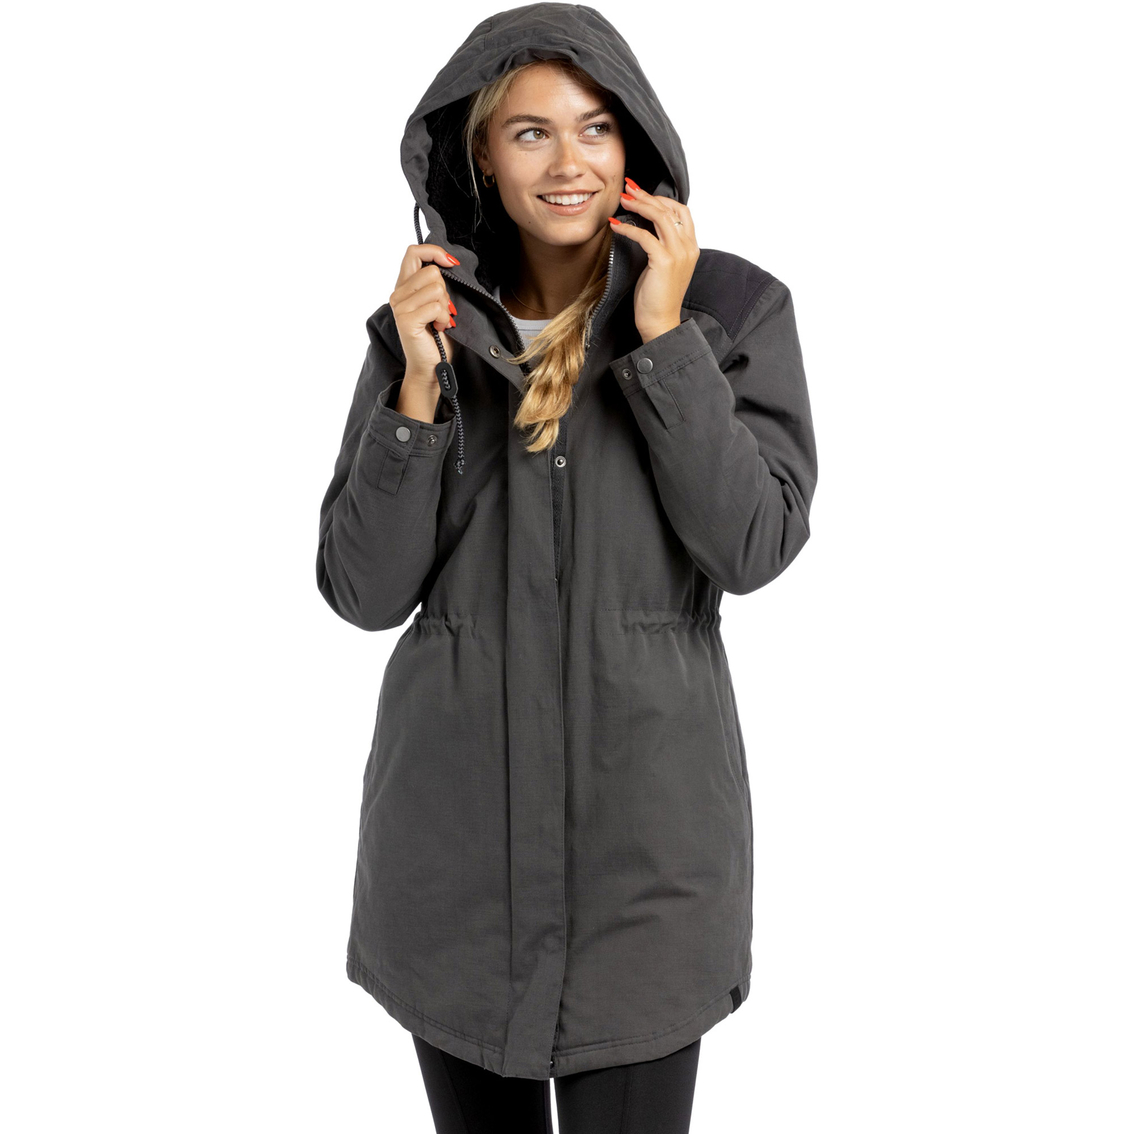 Liv Outdoor Avery Sherpa Lined Jacket | Jackets | Clothing ...